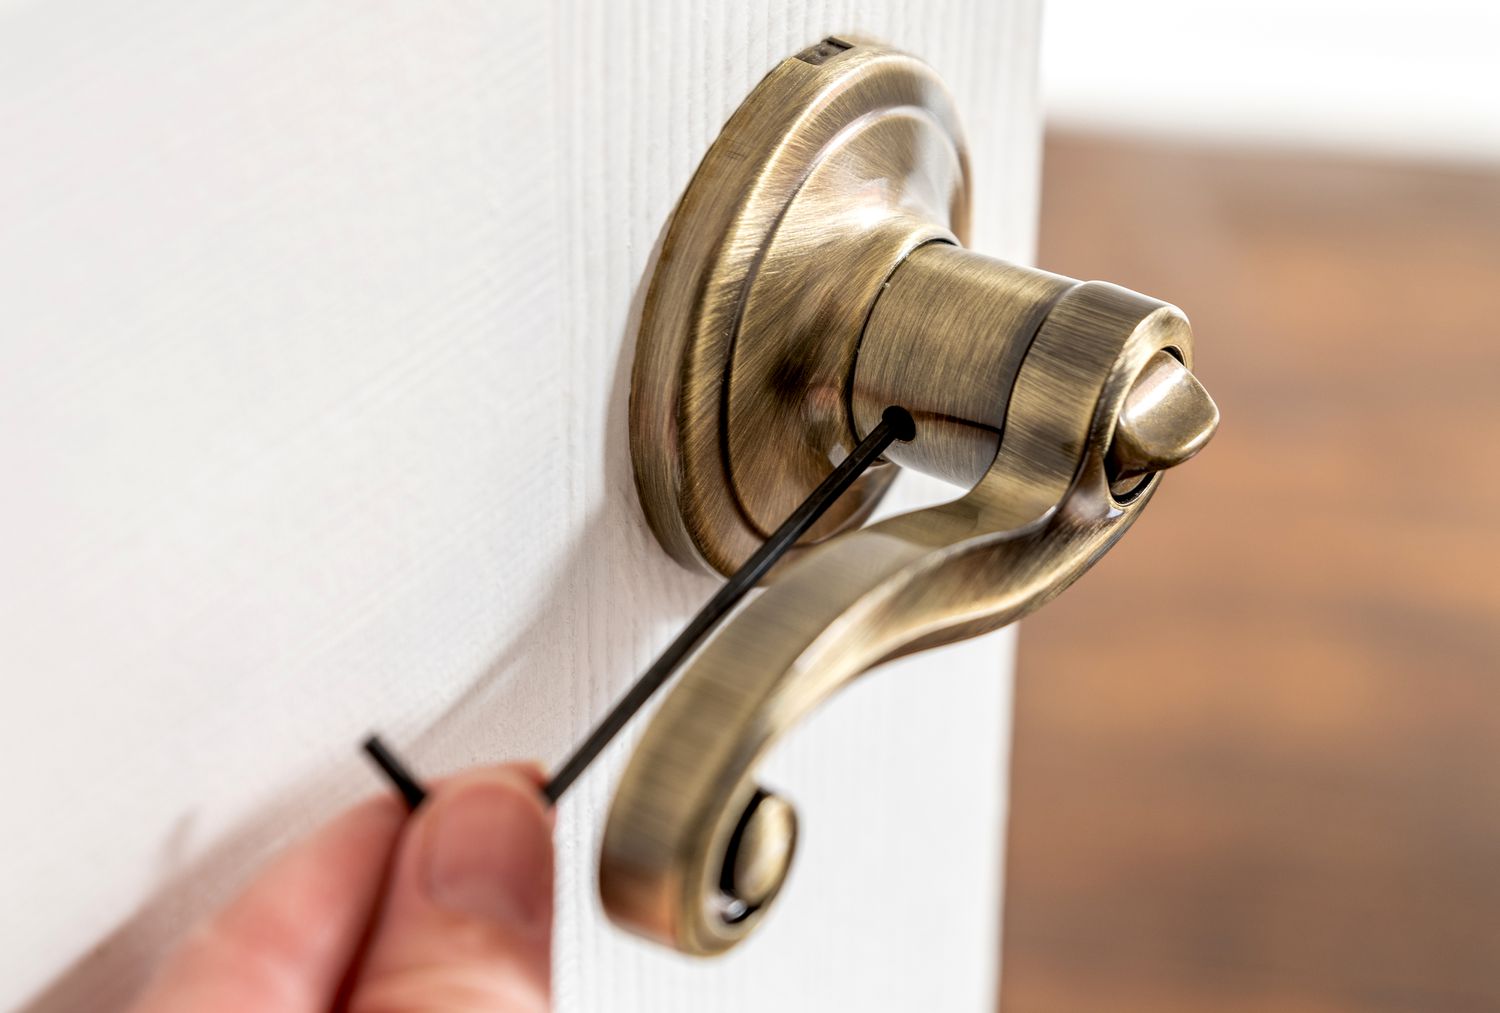 Removing A Door Knob: Step-by-Step Guide